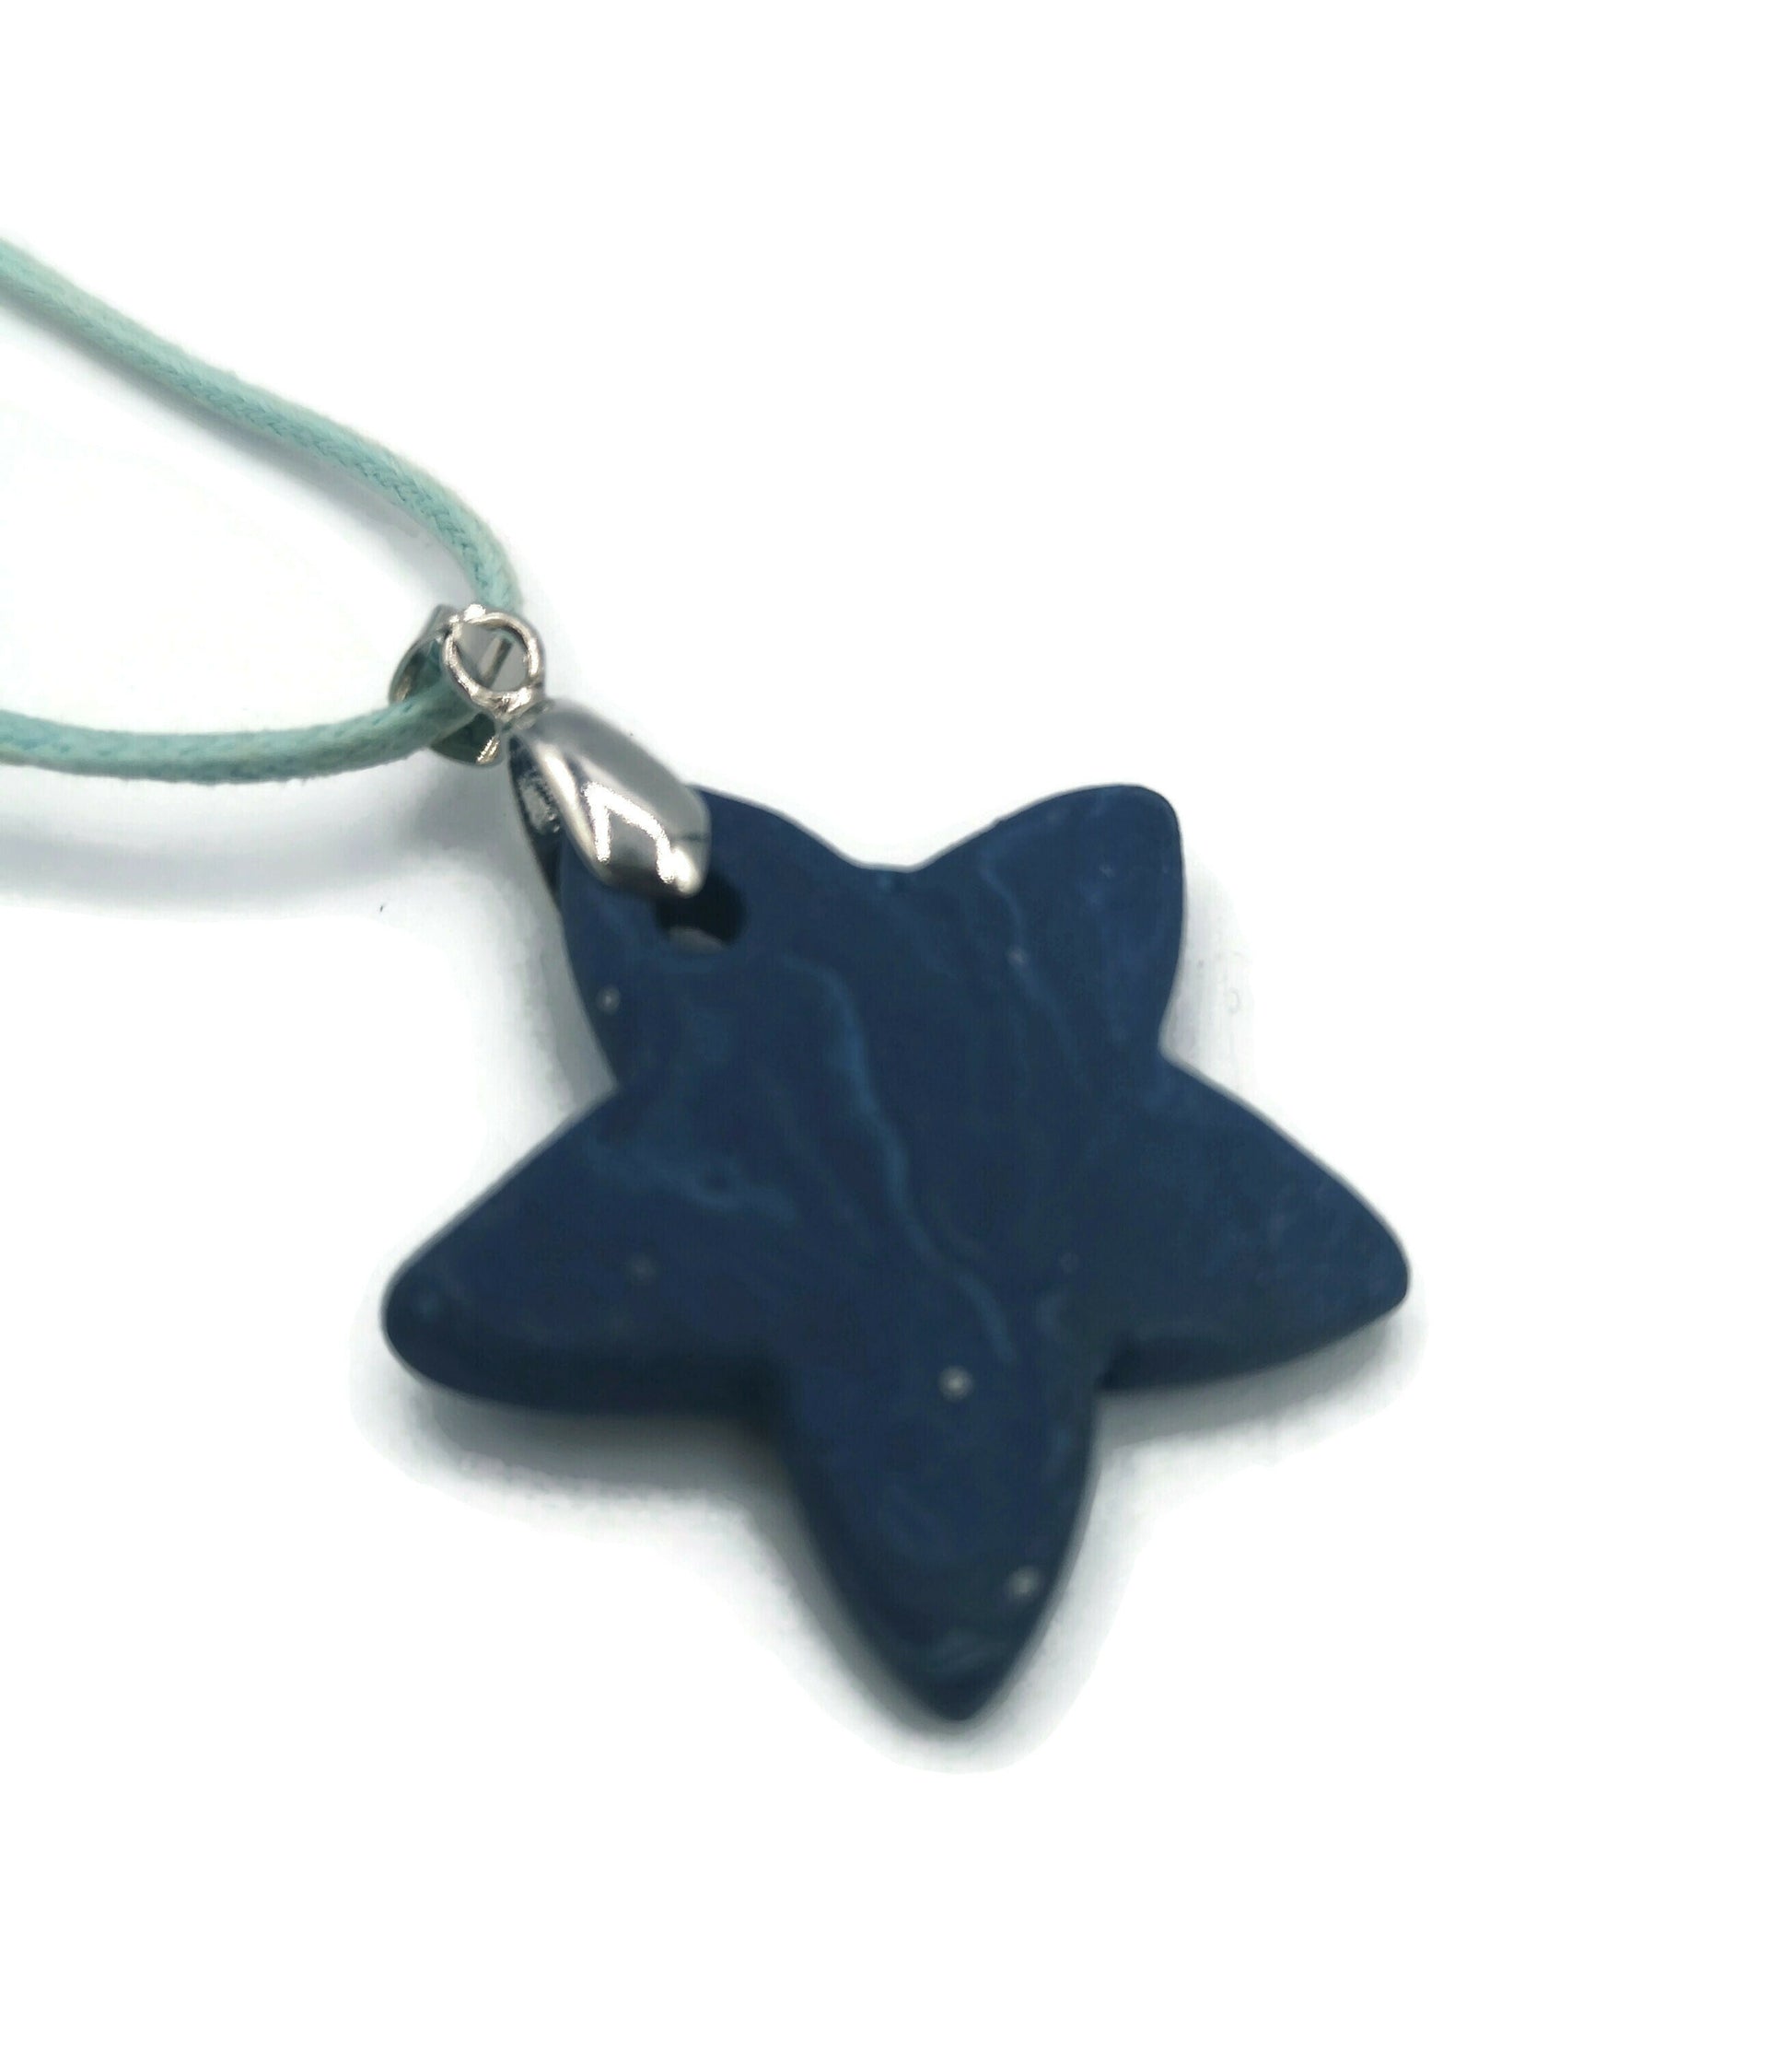 1Pc Large Matte Blue Star Necklace Pendant For Jewelry Making, Unique Jewelry Clay Charms, Handmade Ceramic Celestial Pendant - Ceramica Ana Rafael